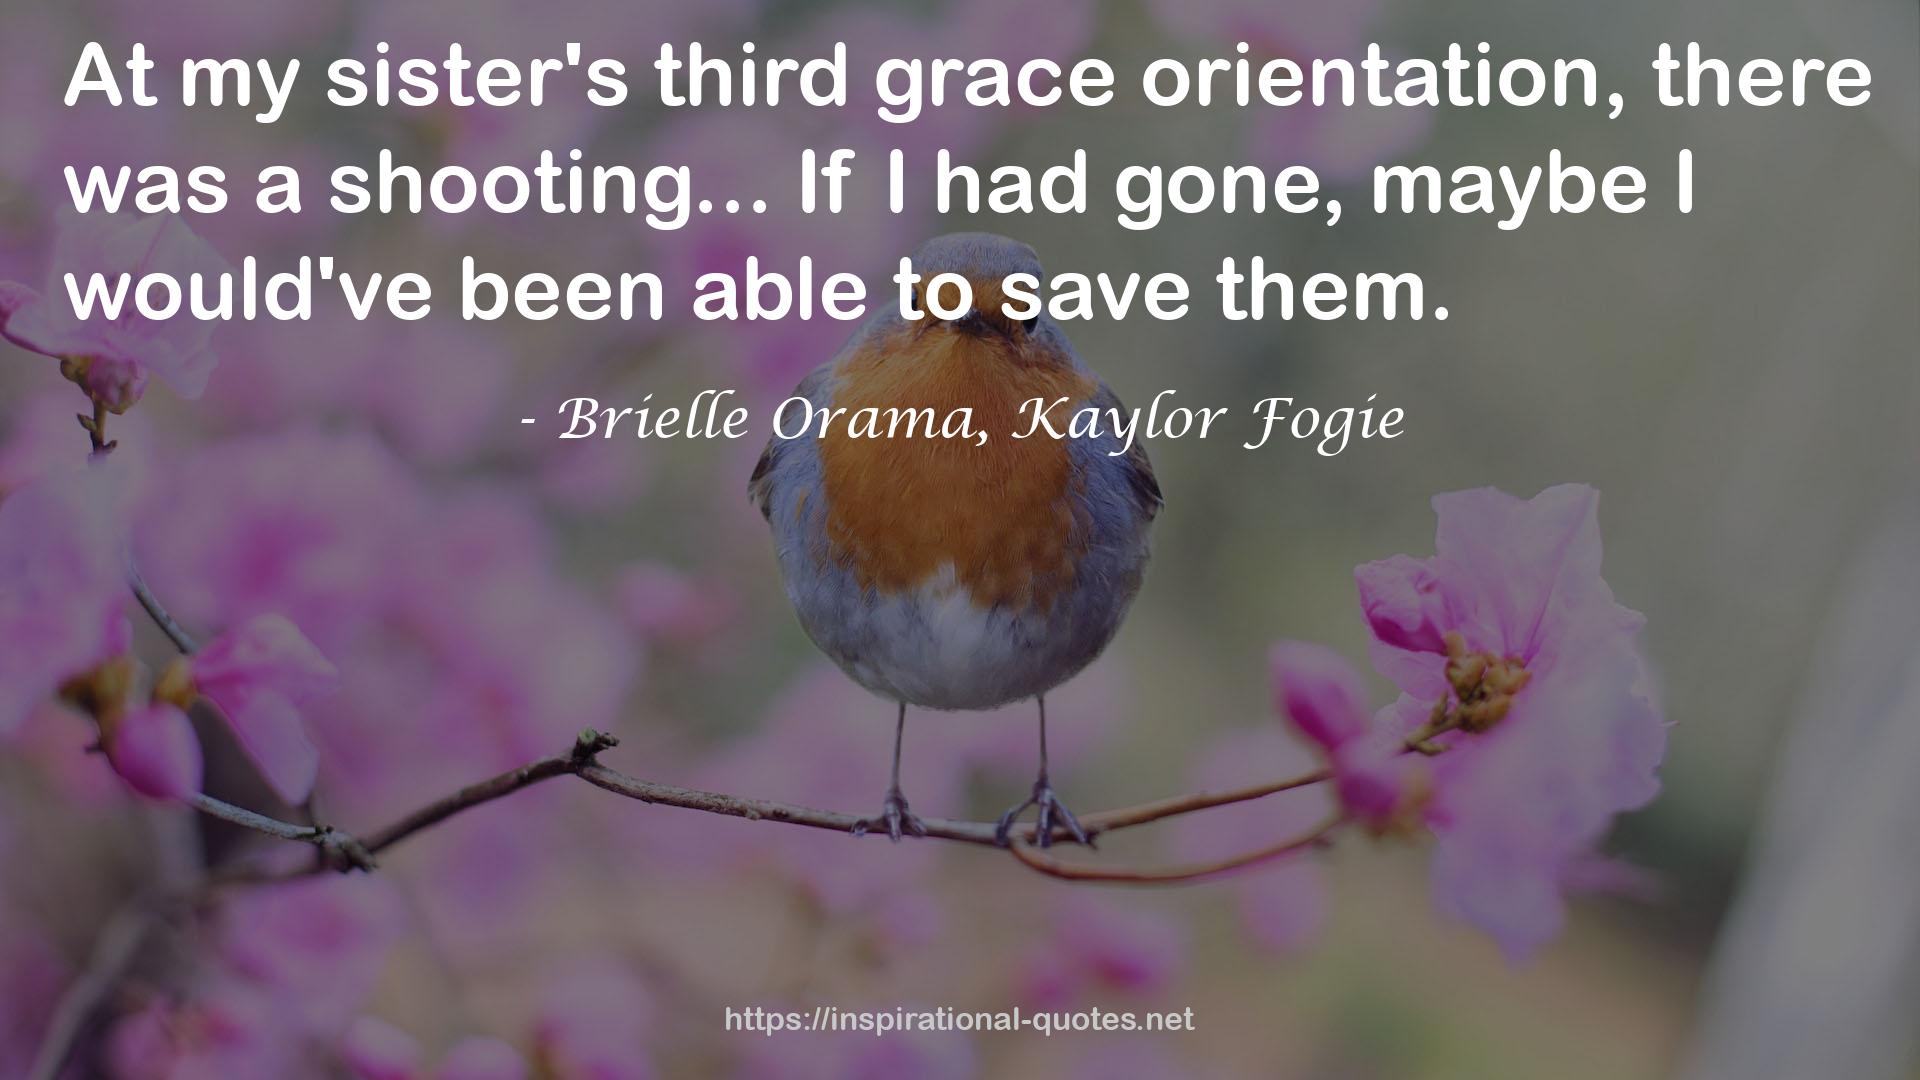 Brielle Orama, Kaylor Fogie QUOTES